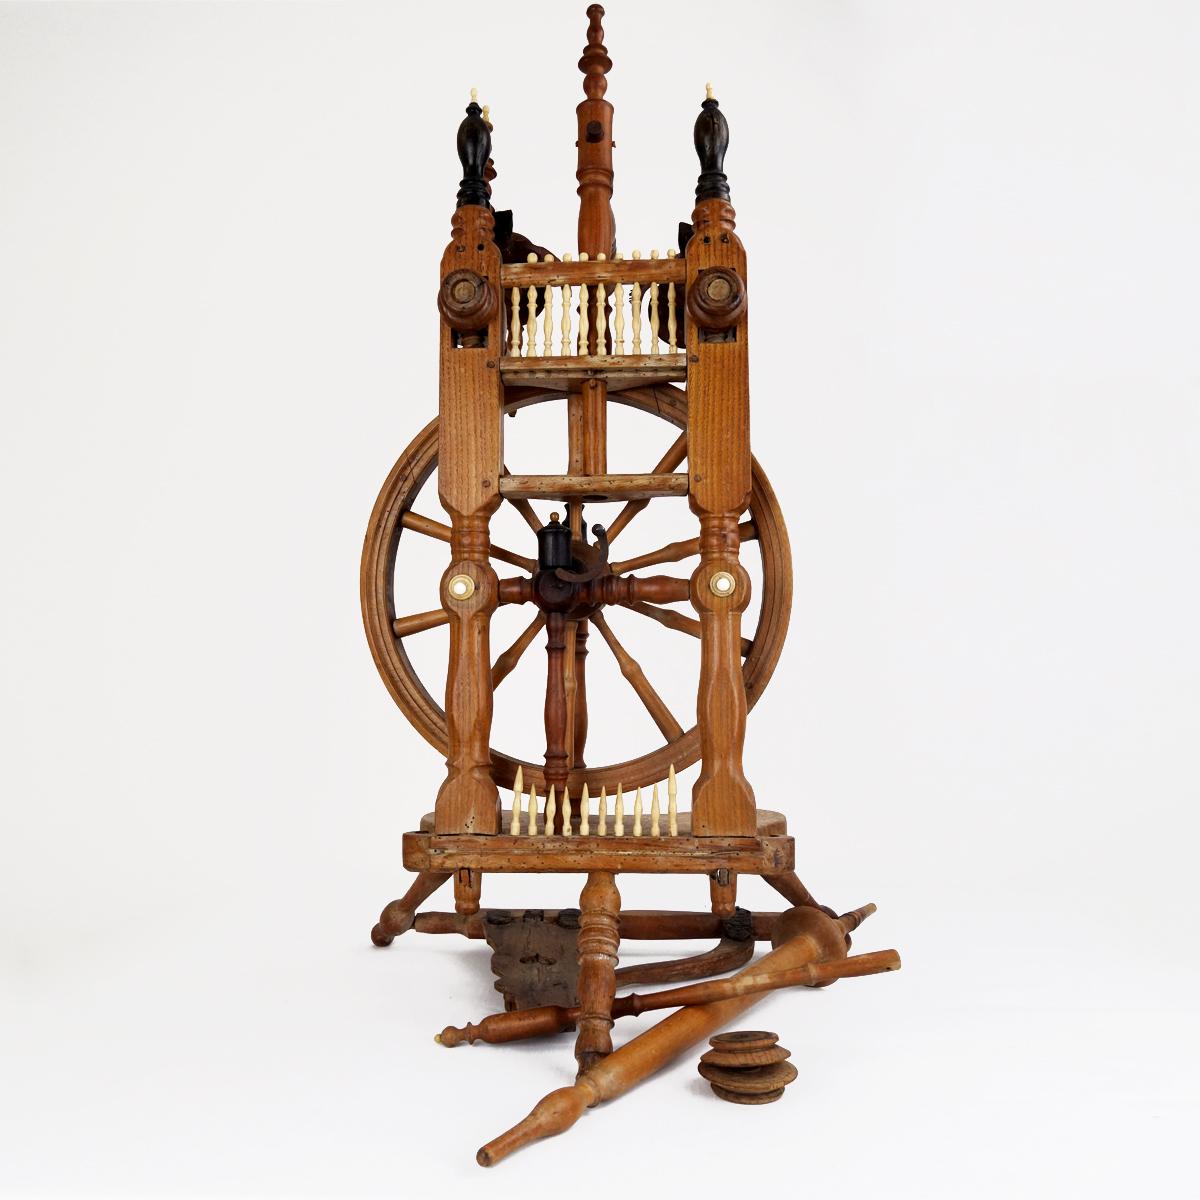 Not only Sleeping Beauty's hair has the color of ebony wood, so do a number of details of this antique spinning wheel. The well shaped lances and buttons made of bone are in a beautiful contrast with the aged wood of the frame.
This centerpiece has